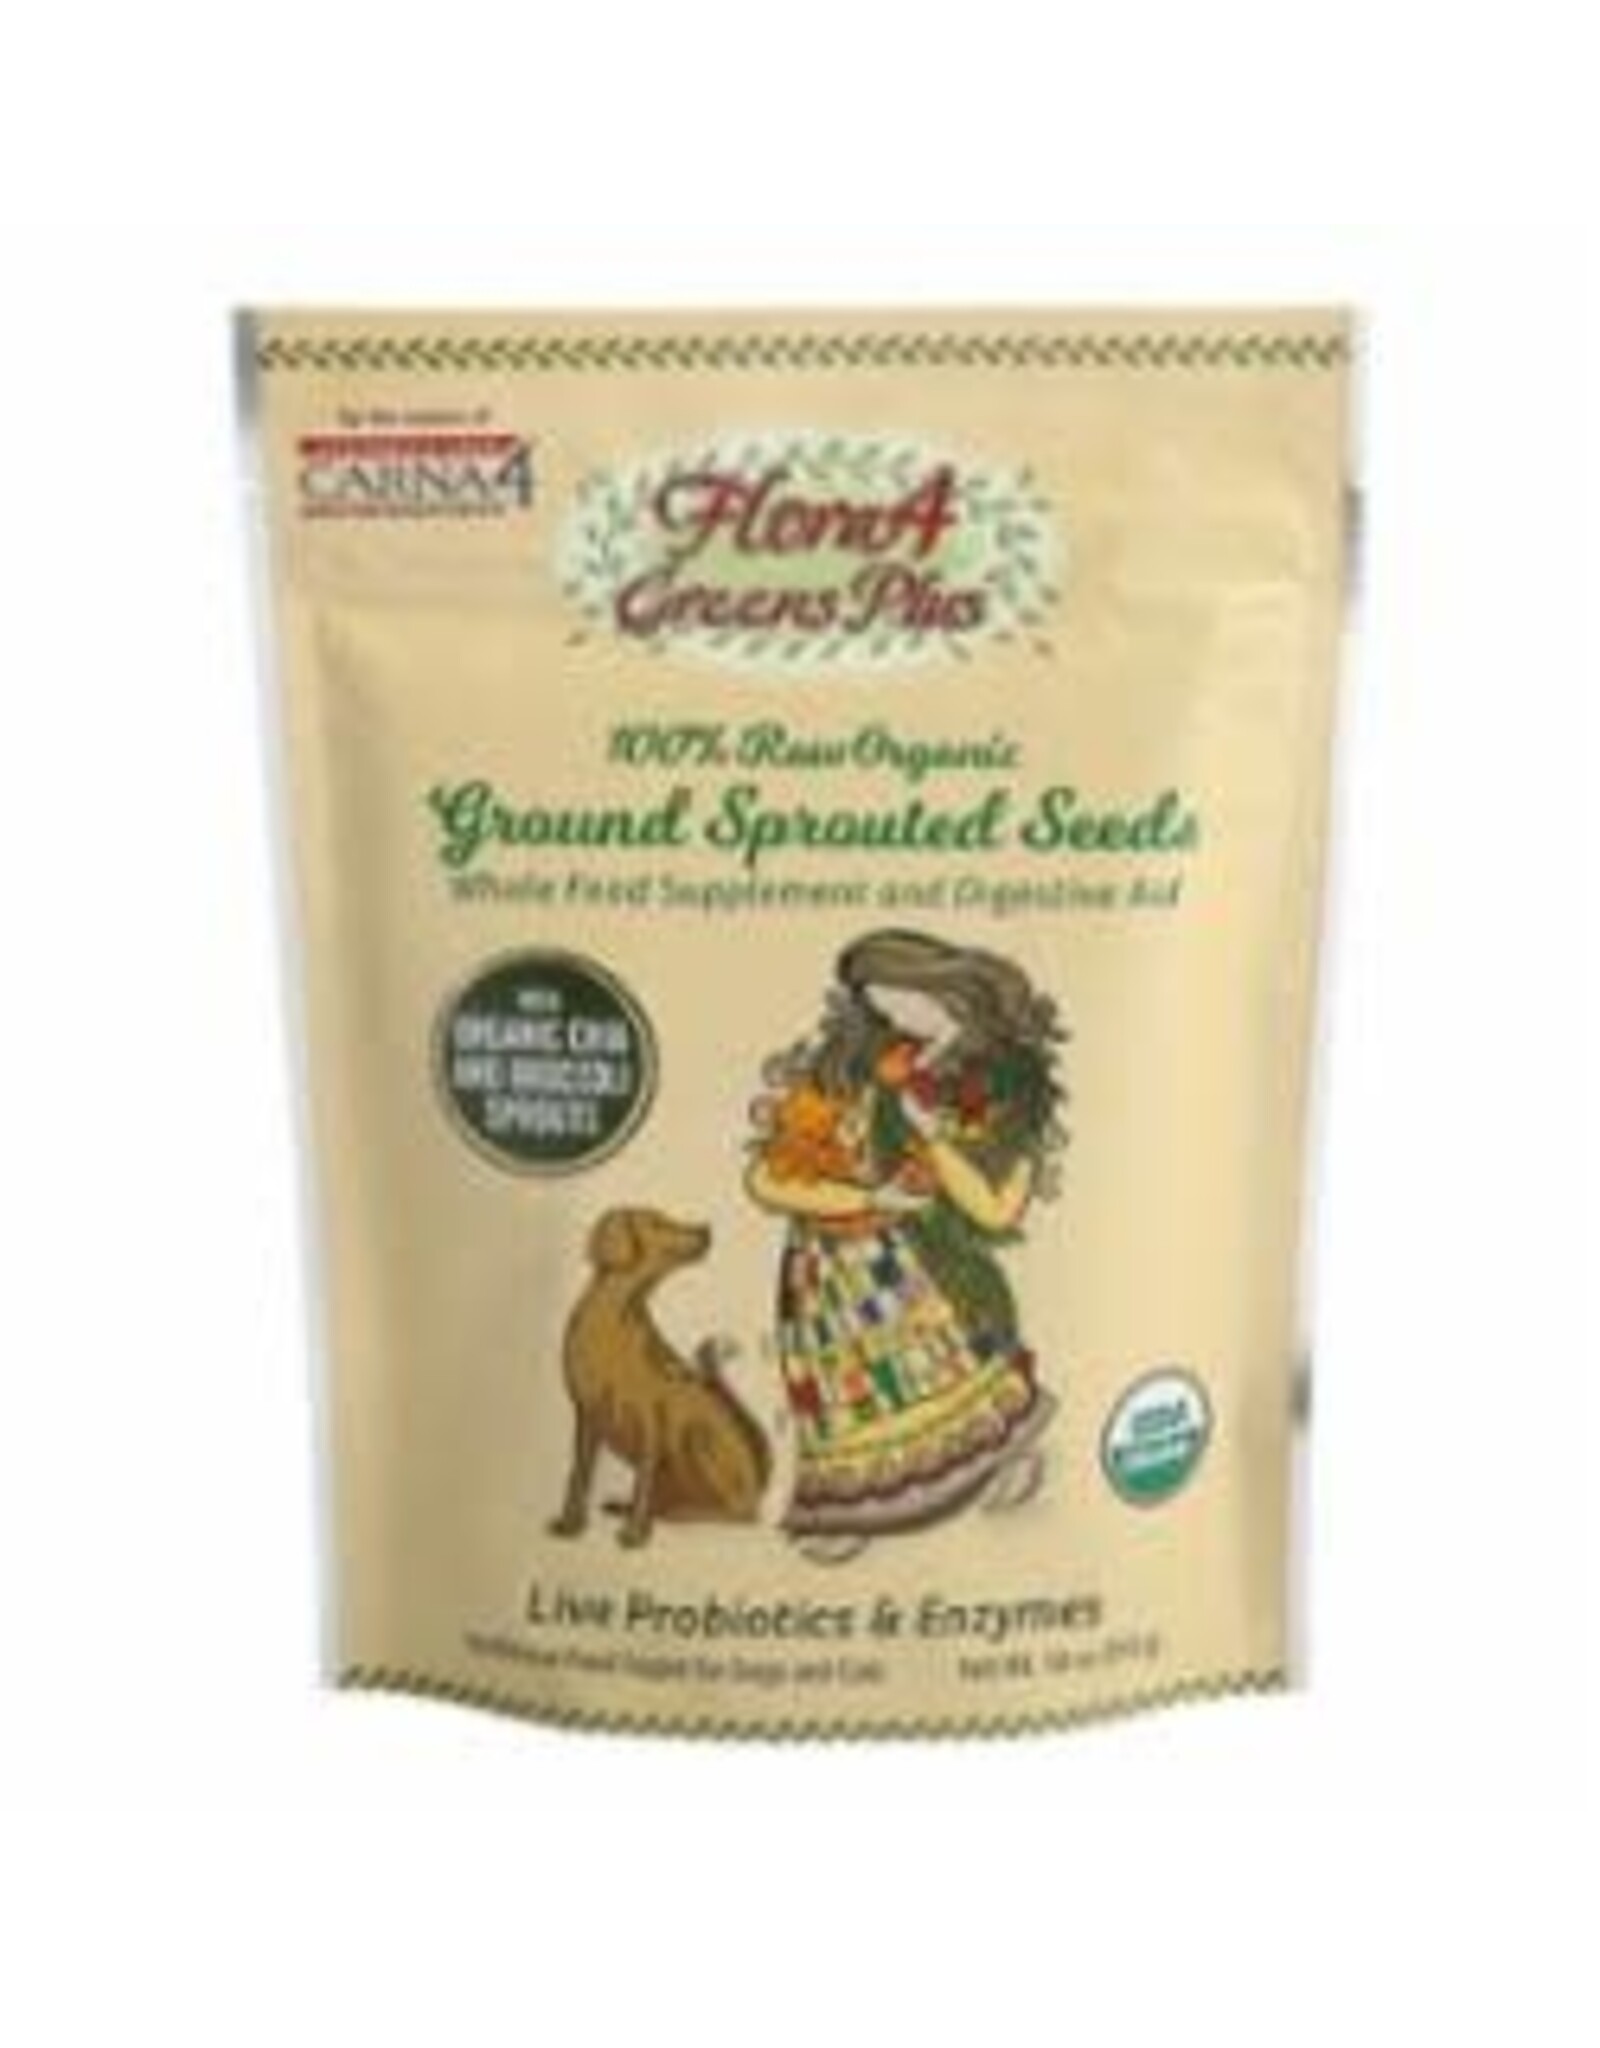 Carna4 Hand Crafted Pet Food CARNA4 CARNA FLORA4 GREENS PLUS SPROUTED SEEDS 18OZ